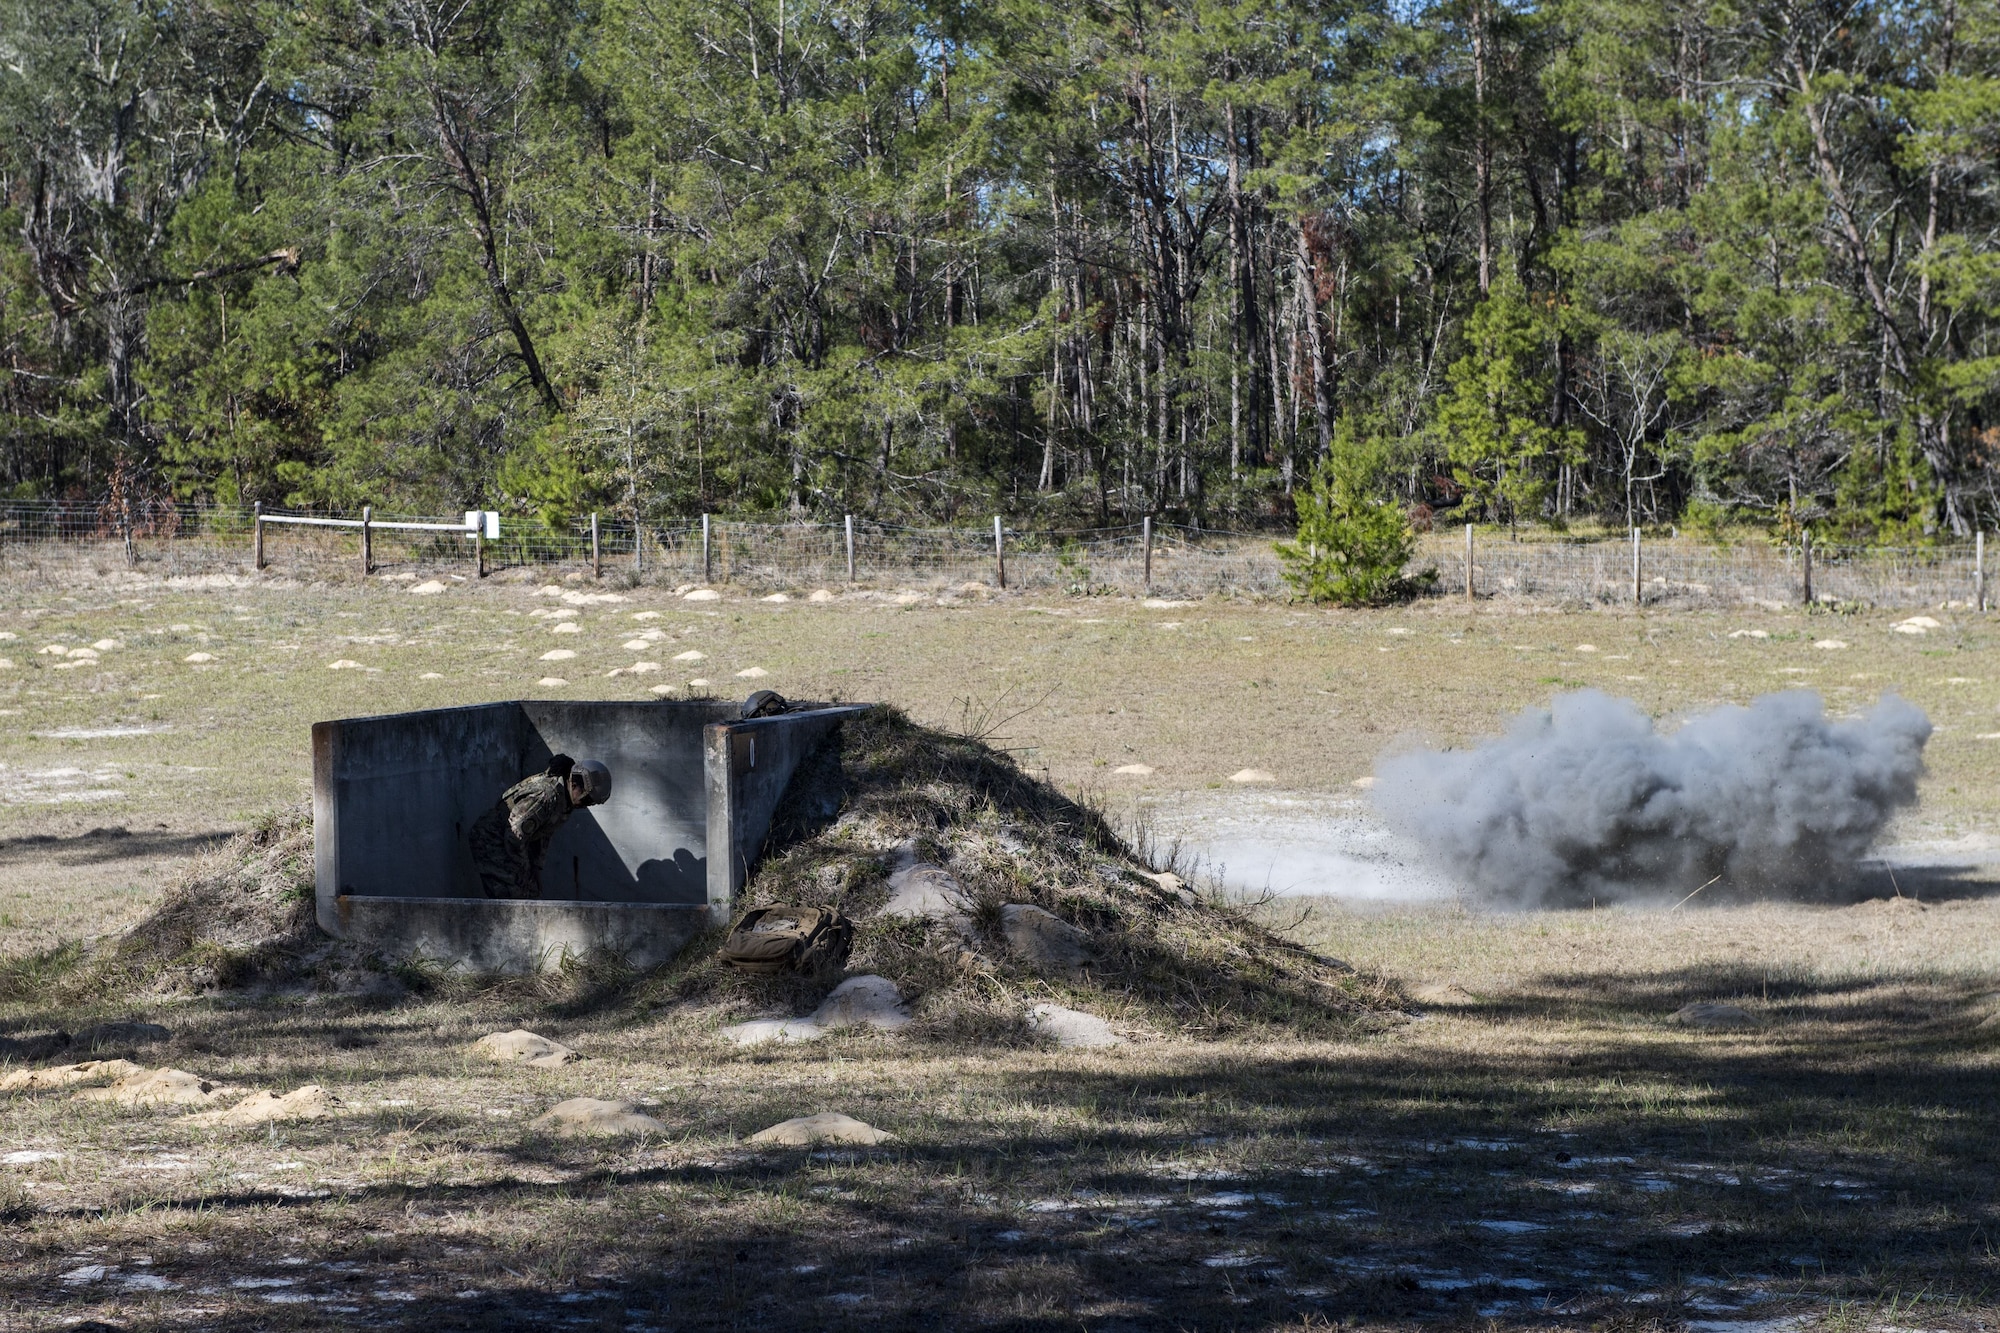 Tech. Sgt. Leticia Brazil, 823d Base Defense Squadron NCO in charge of medical, ducks for cover as grenade explodes during a heavy weapons qualification, Dec. 13, 2017, at Camp Blanding Joint Training Center, Fla. Airmen threw grenades targets to maintain their proficiency and familiarize themselves with the weapon. (U.S. Air Force photo by Senior Airman Janiqua P. Robinson)